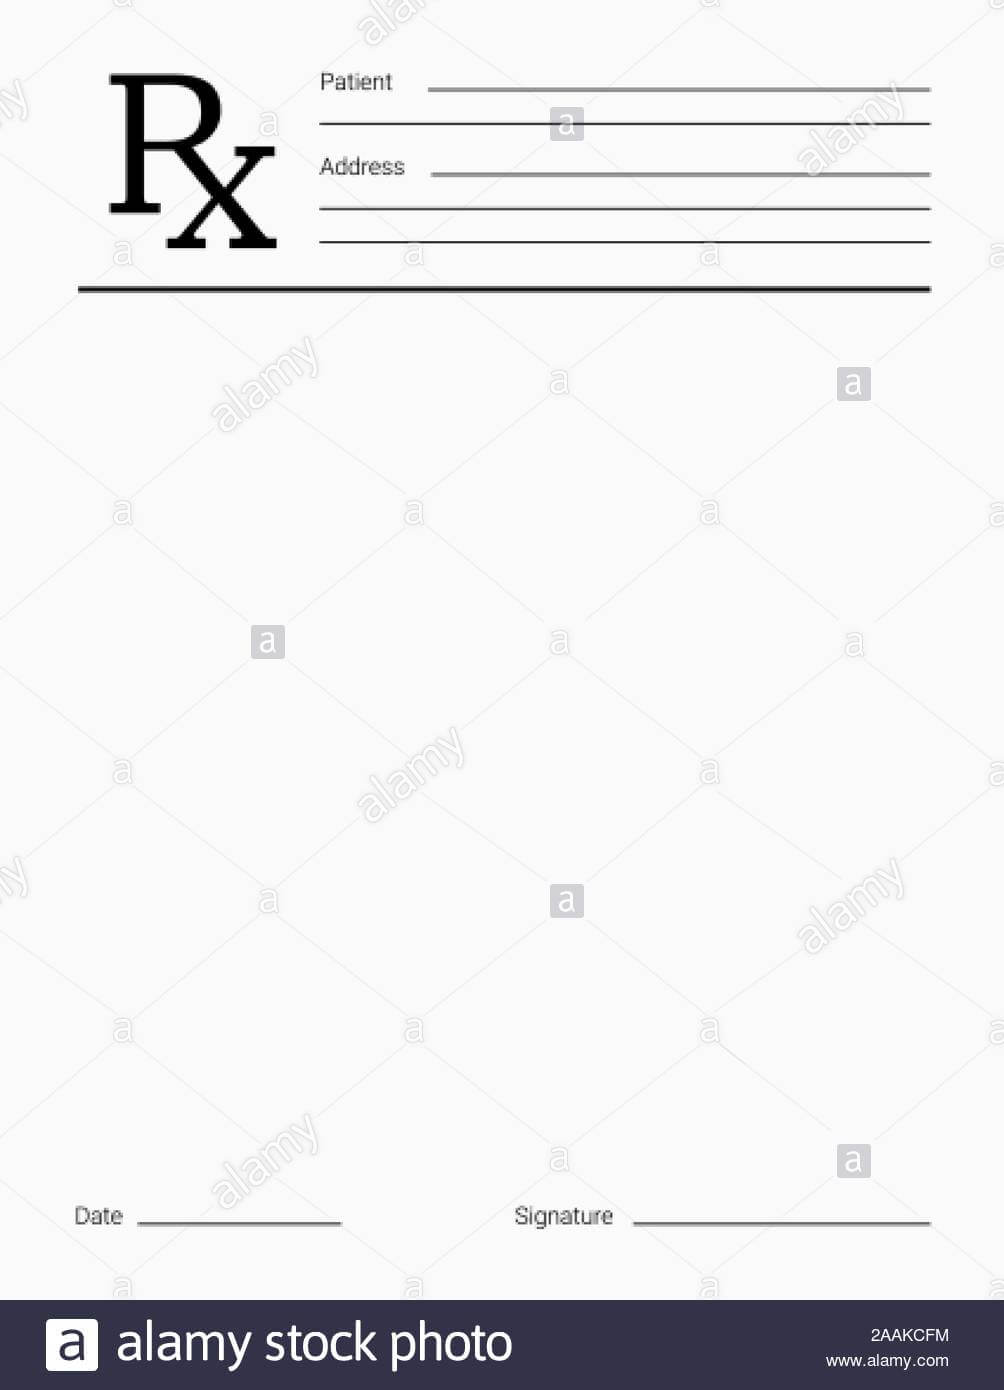 Doctor's Rx Pad Template. Blank Medical Prescription Form For Blank Prescription Pad Template